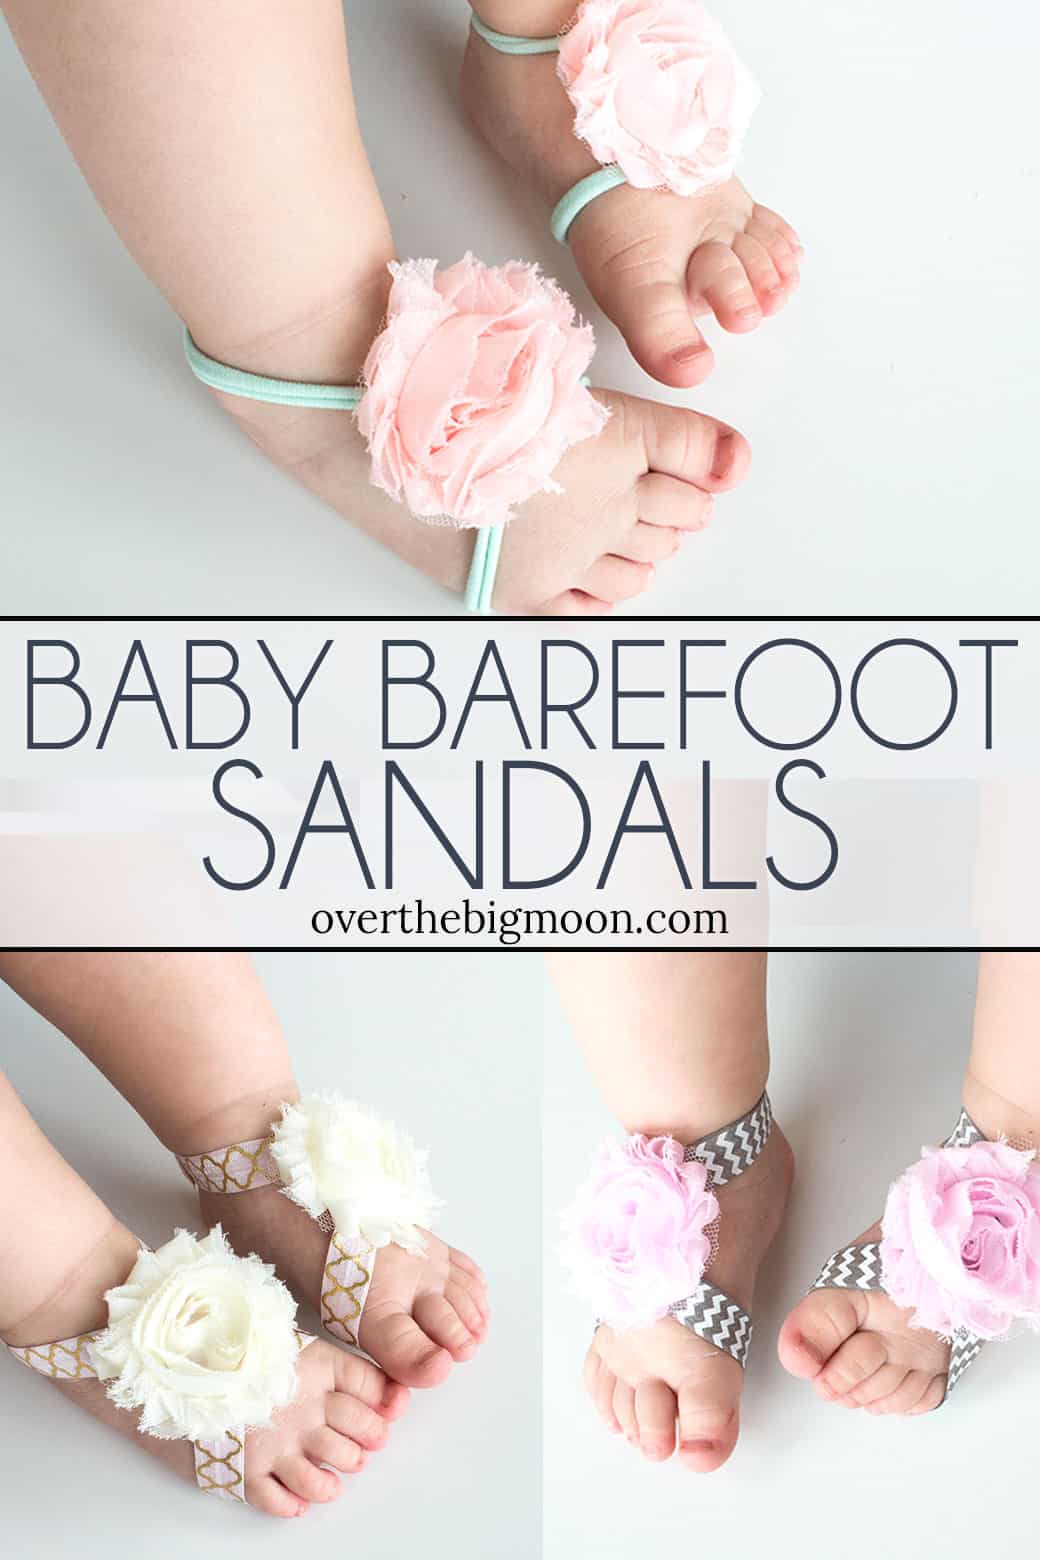 These Stitchless Barefoot Slippers are perfect for babies' tiny feet! These are perfect for babies up to 18 months! Full instructions and videos at topqa.info!